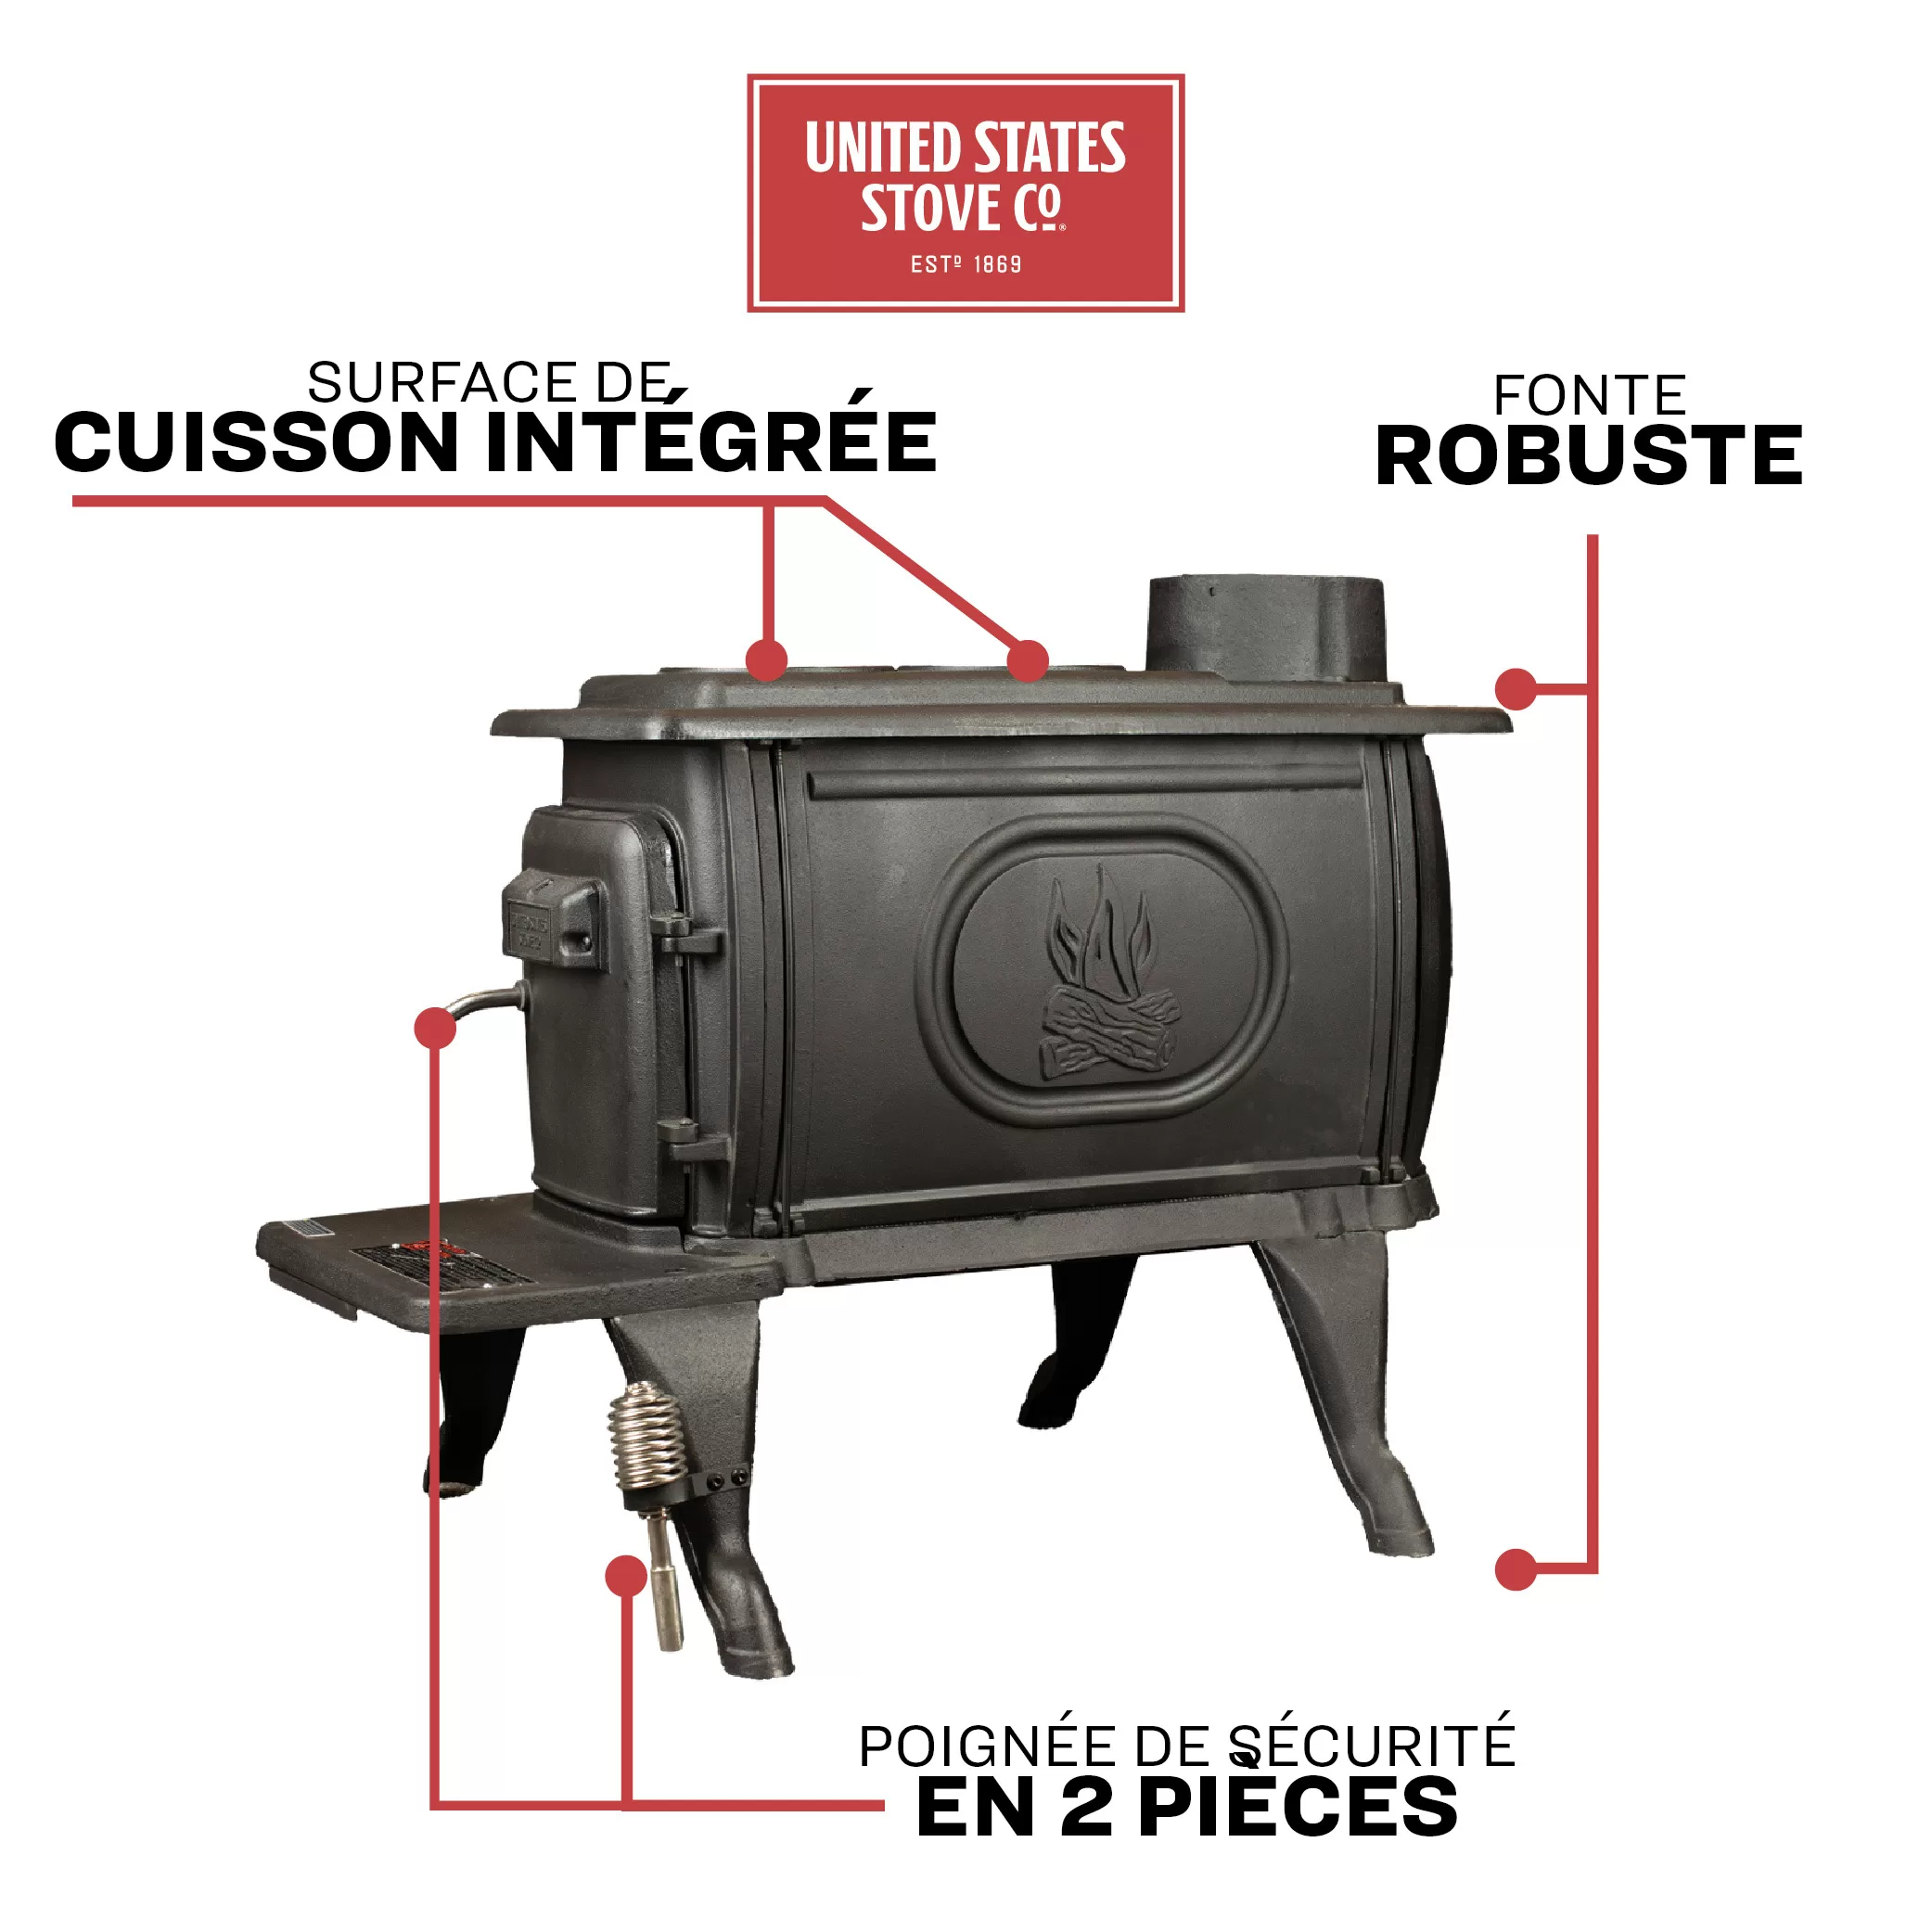 https://www.usstove.com/wp-content/uploads/2020/01/Wood-Stove_US1269E_Features-2-jpg.webp